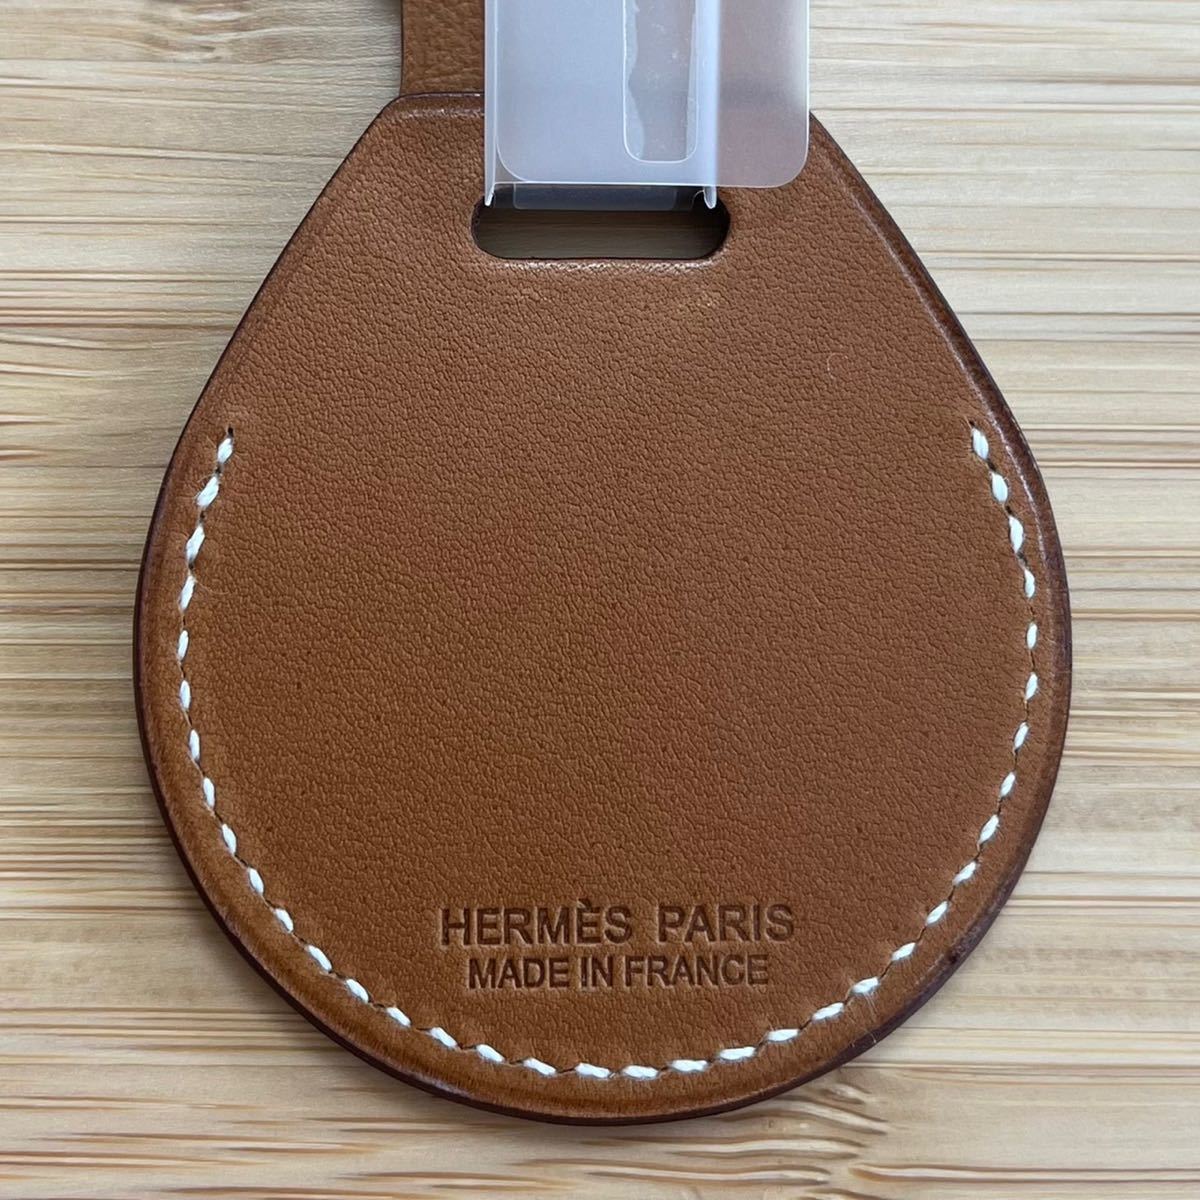 Apple AirTag Herms ネームタグ エルメス | www.crf.org.br